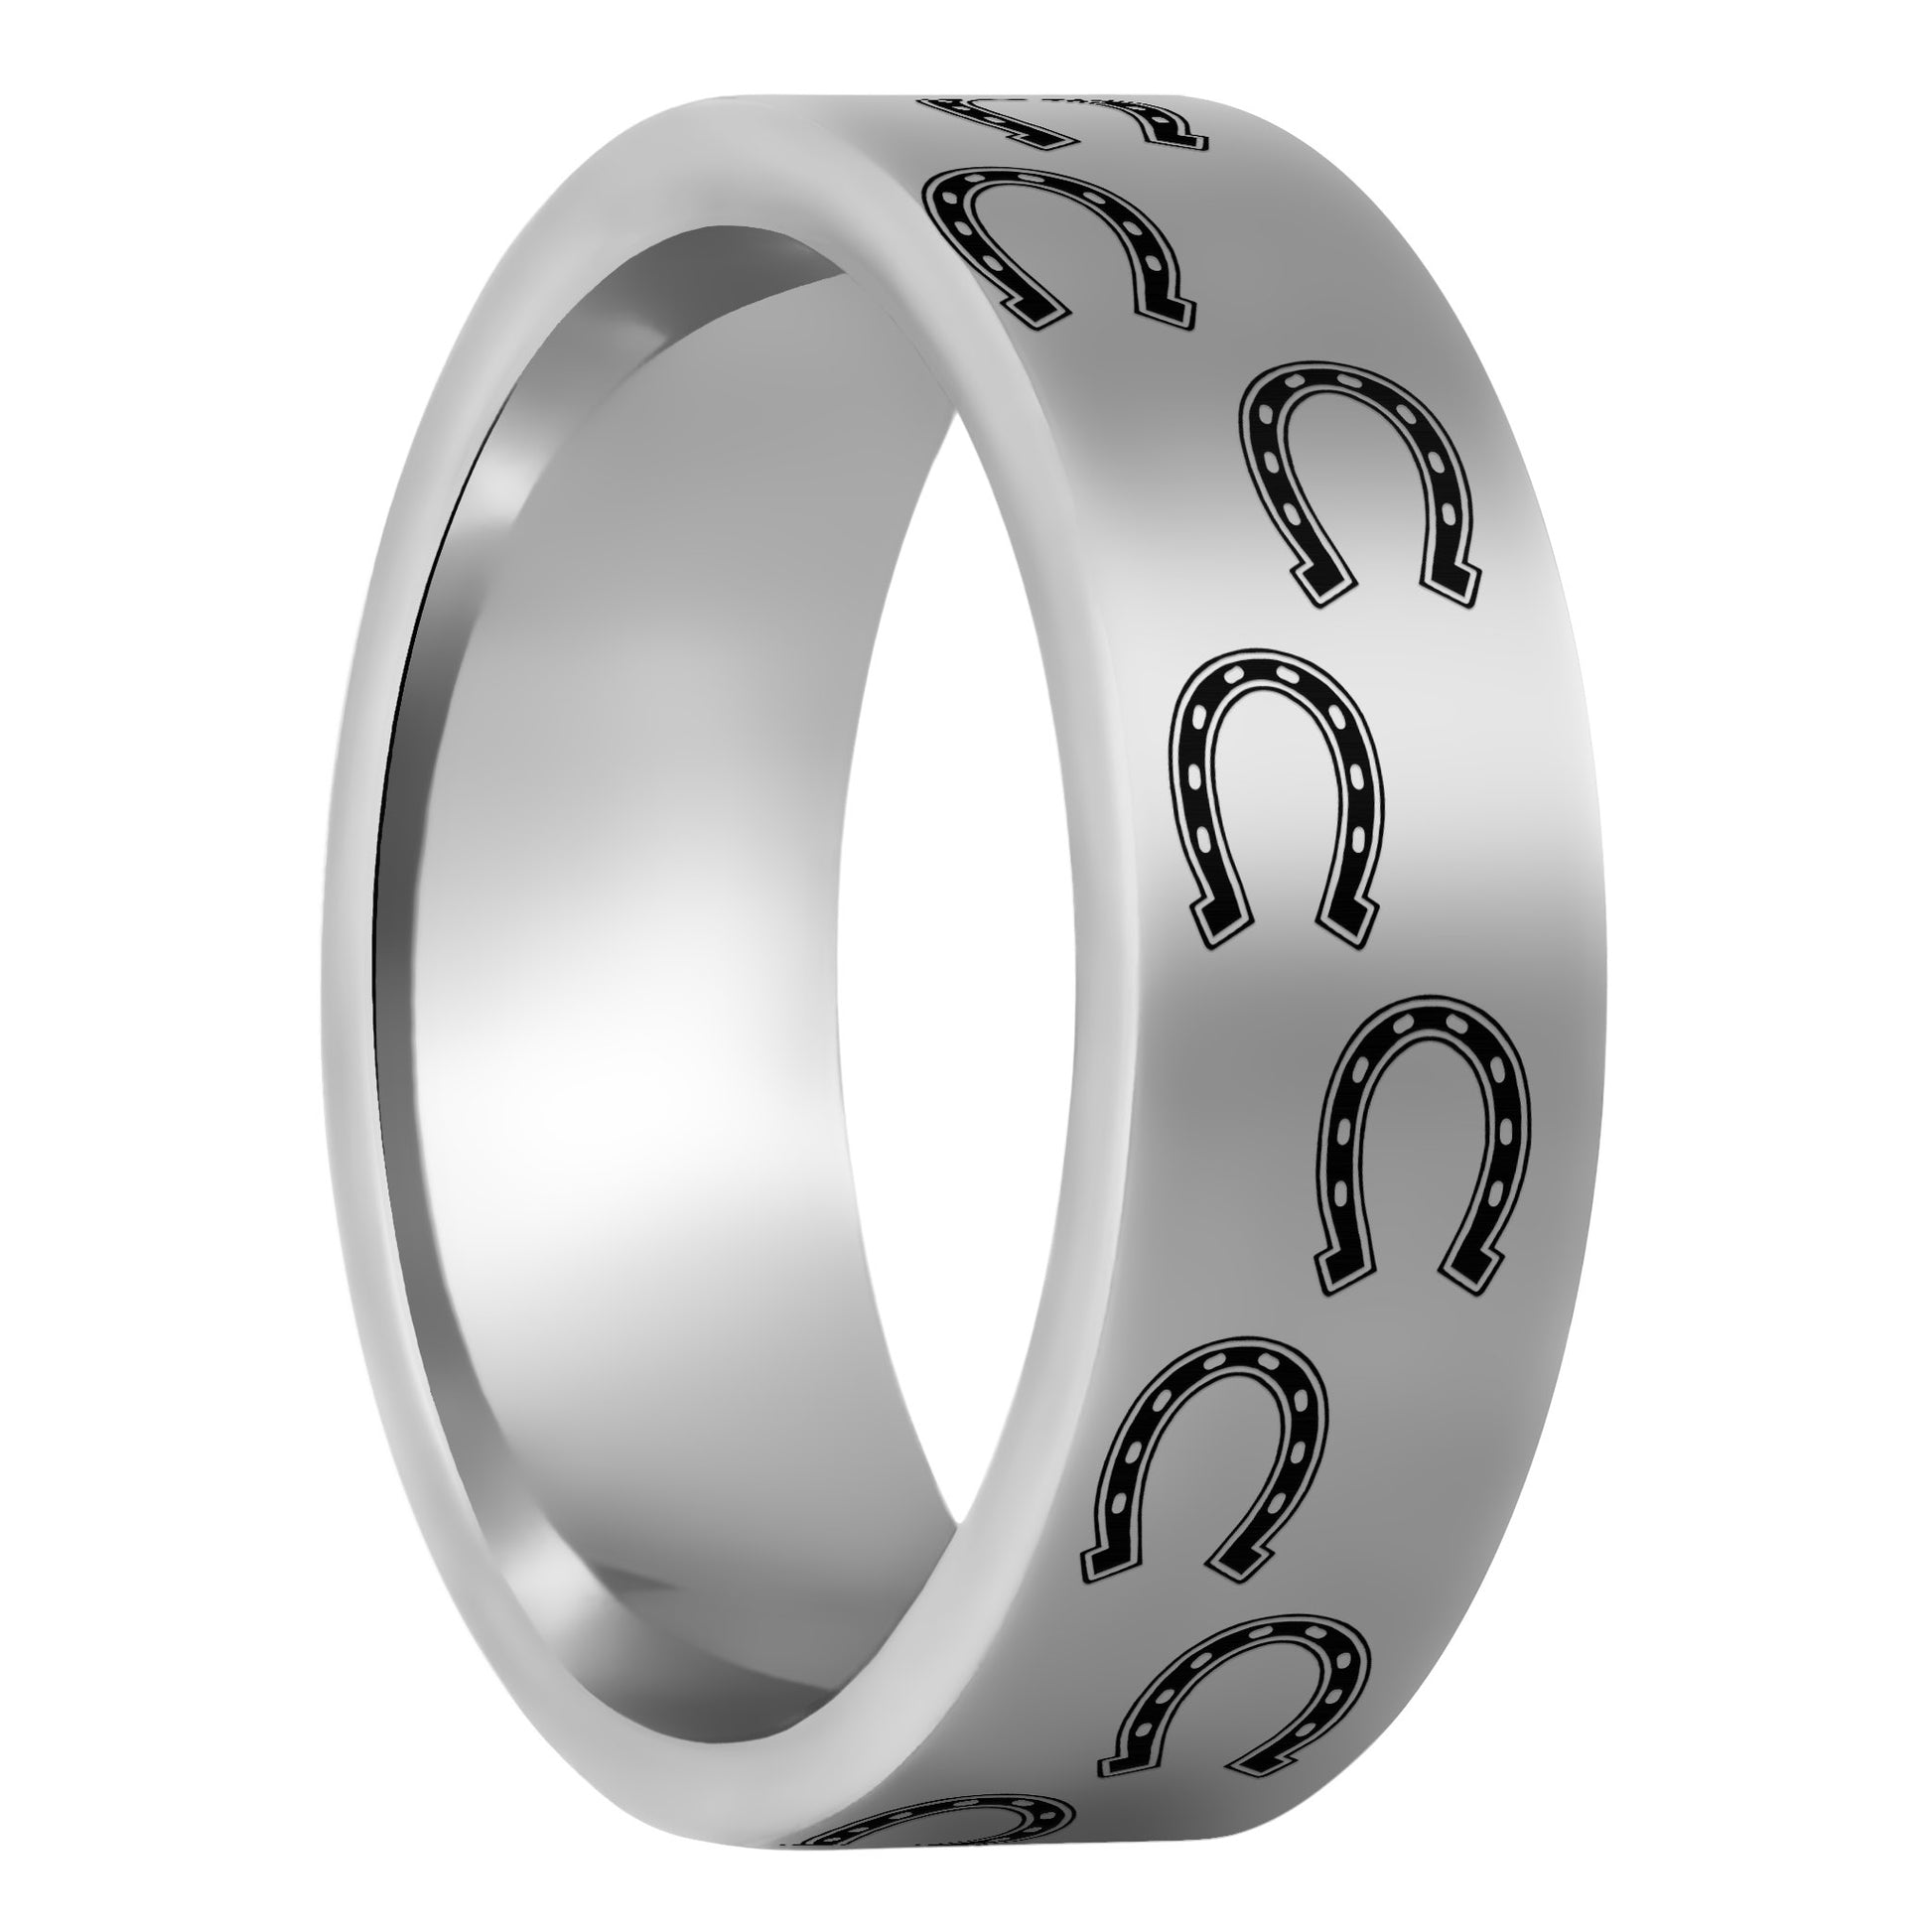 One Horseshoes Tungsten Men's Wedding Band displayed on a plain white background